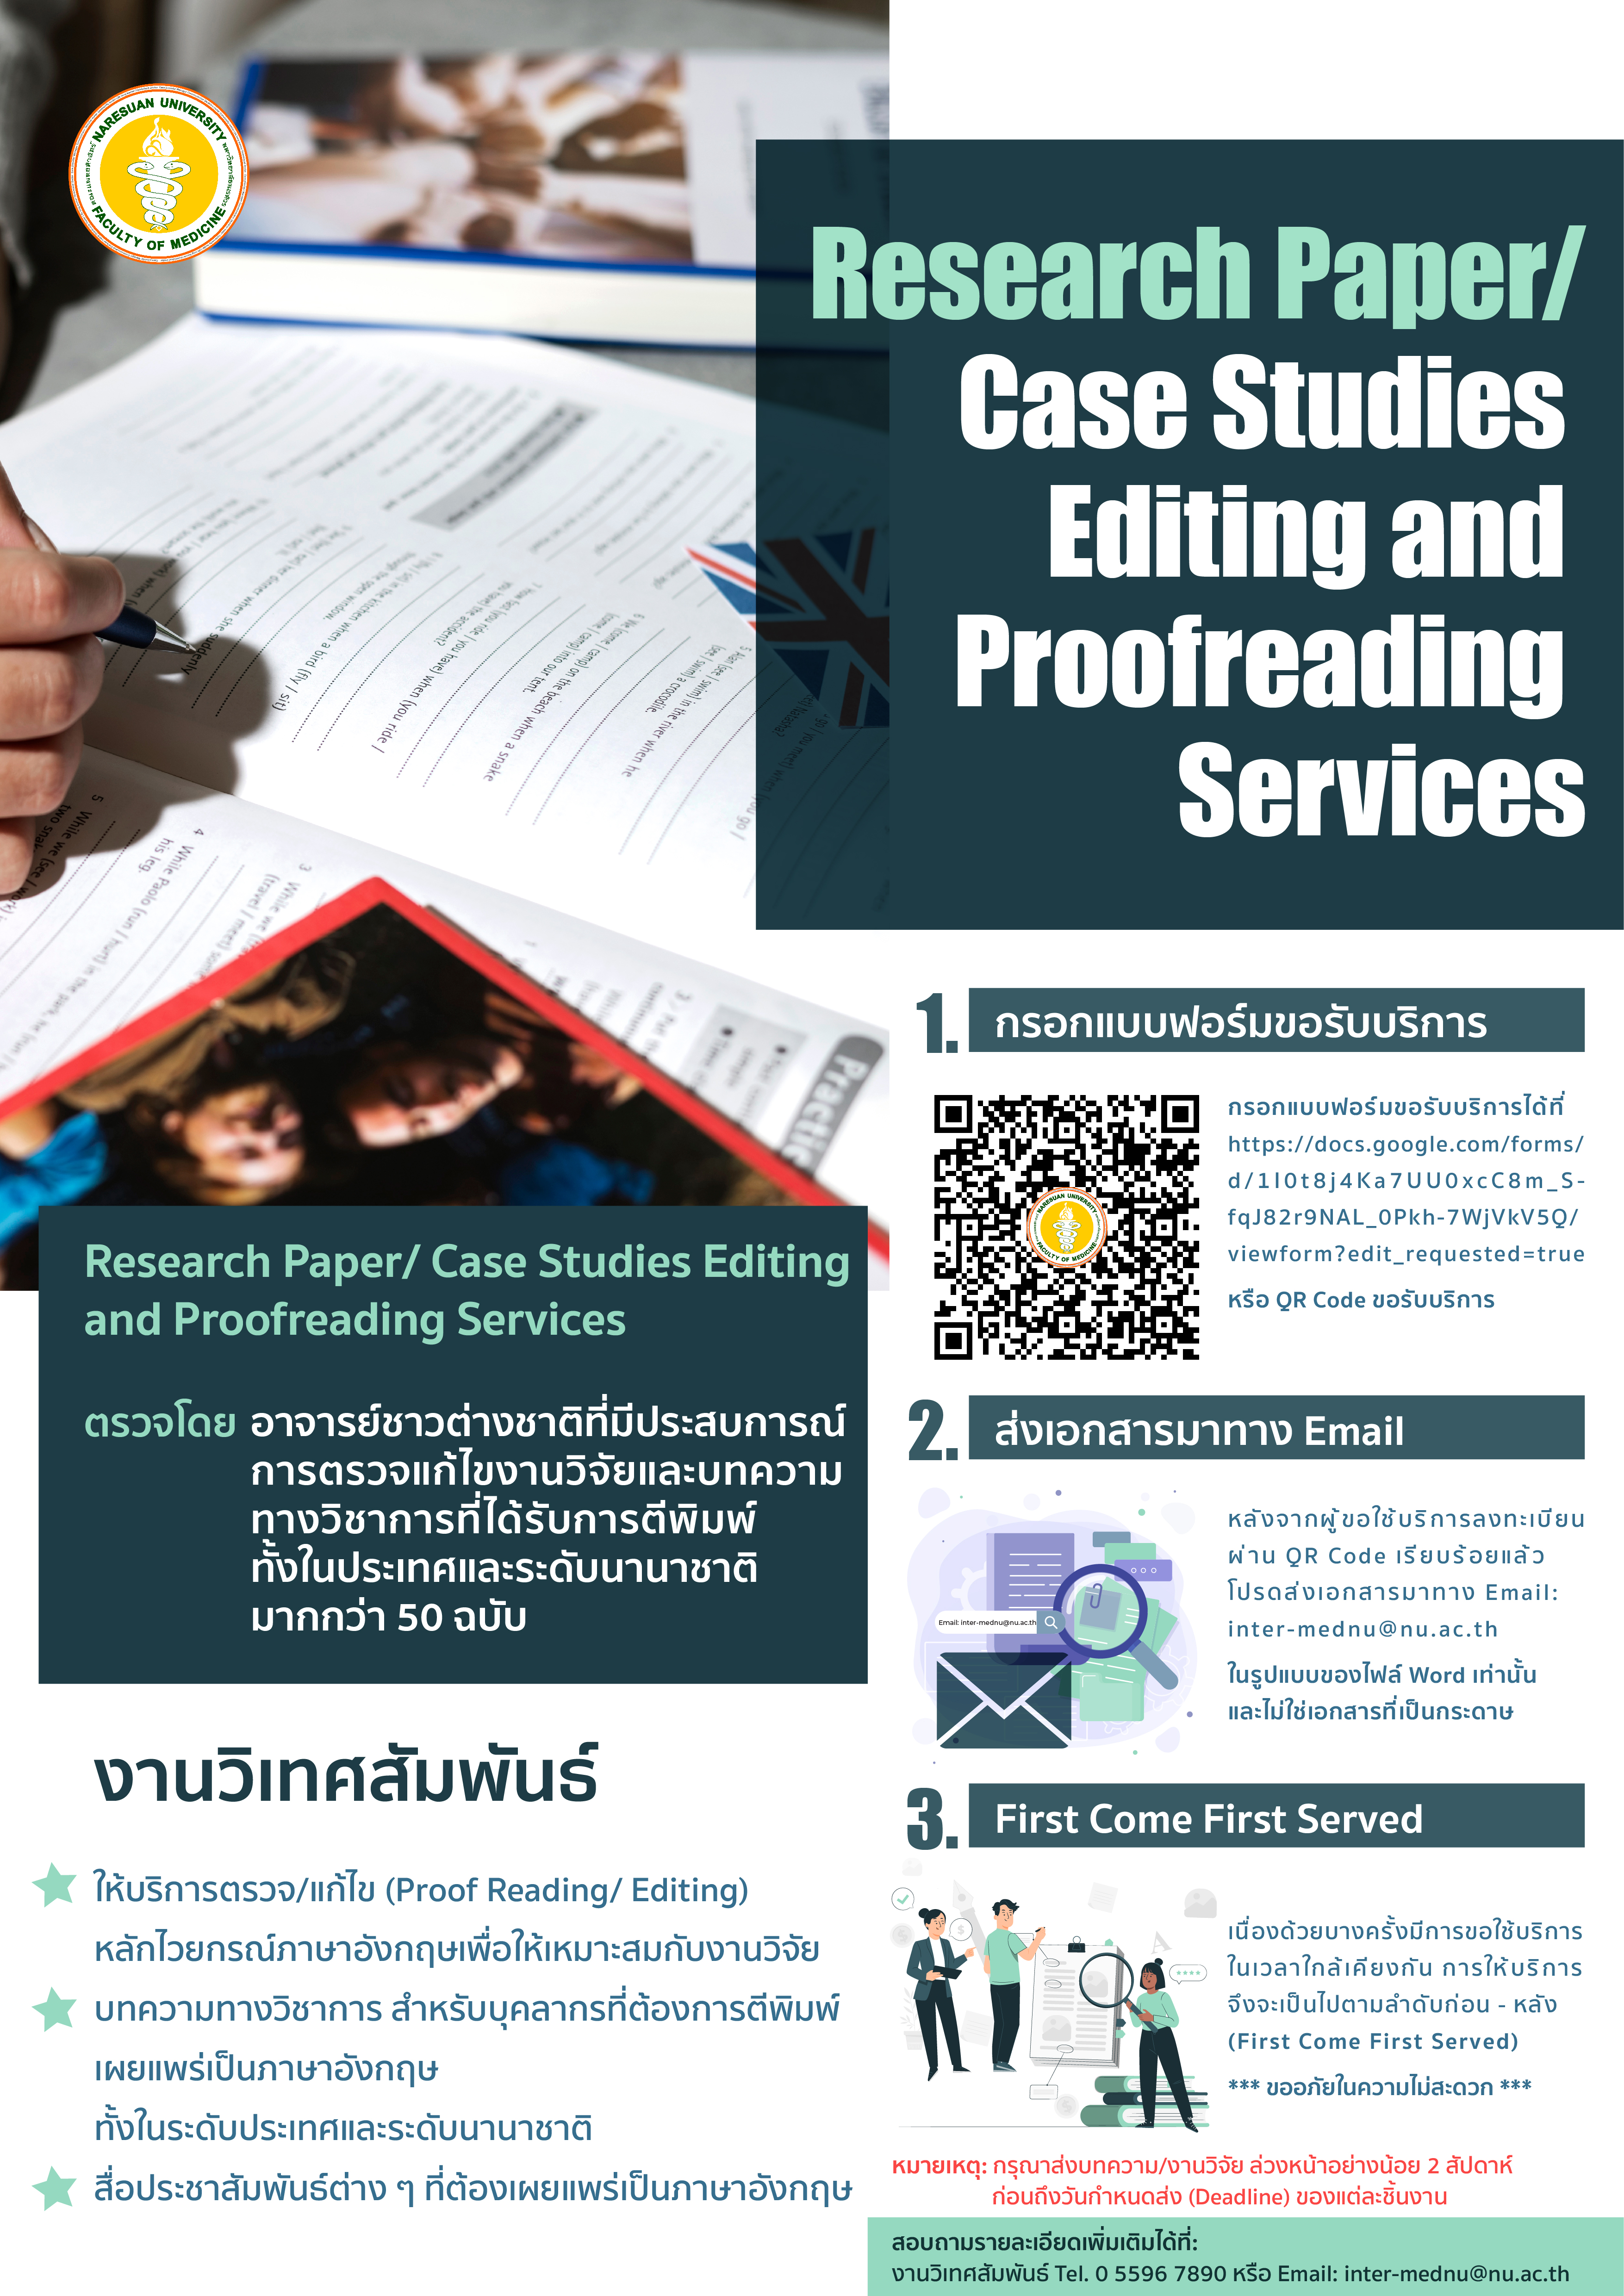 Research Paper/ Case Studies Editing and Proofreading Services